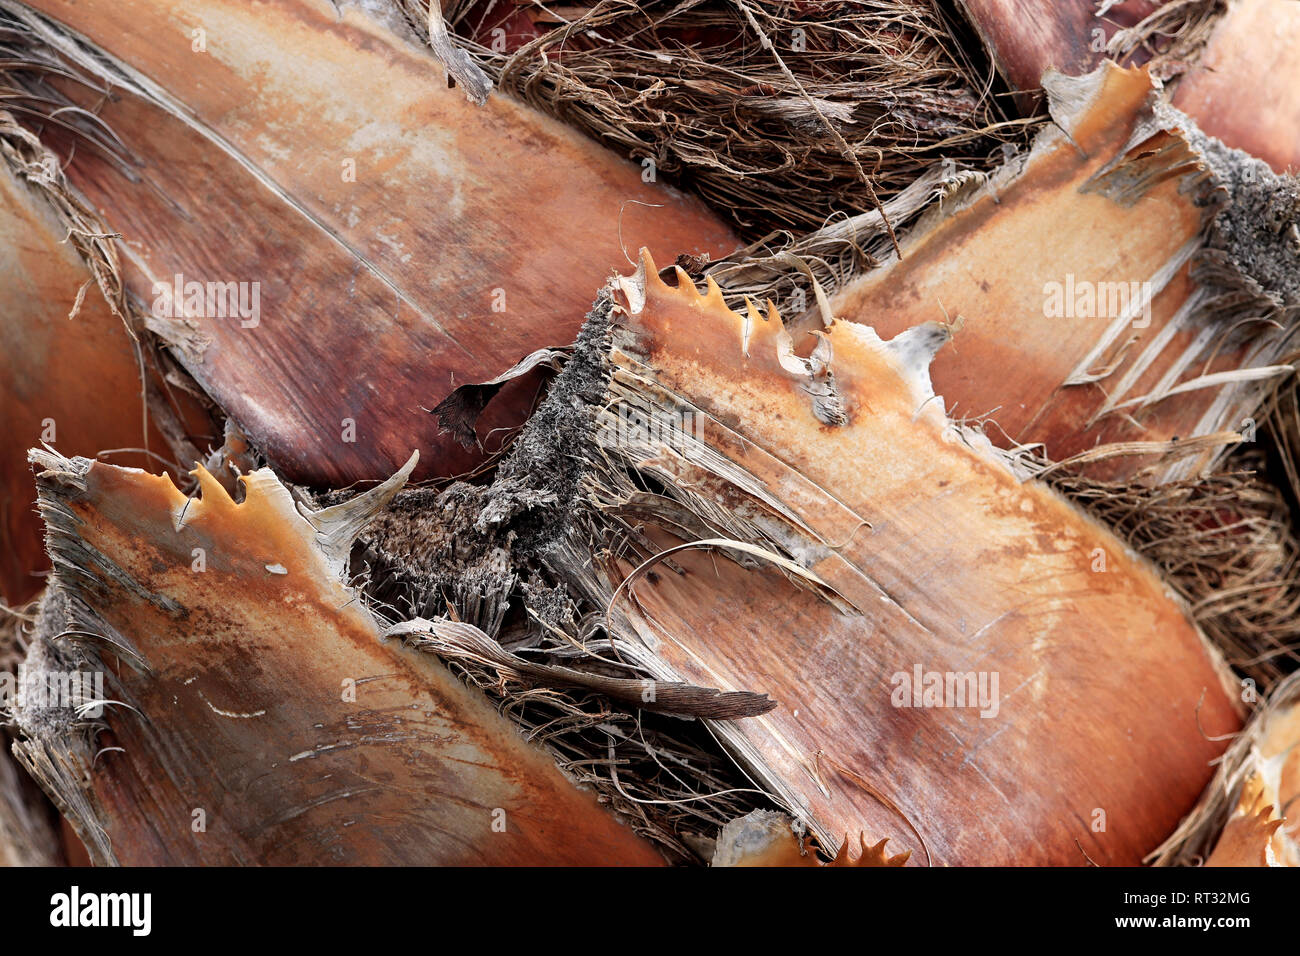 Palm tree bark texture. Tropical cut branches wood bark structure background. Stock Photo